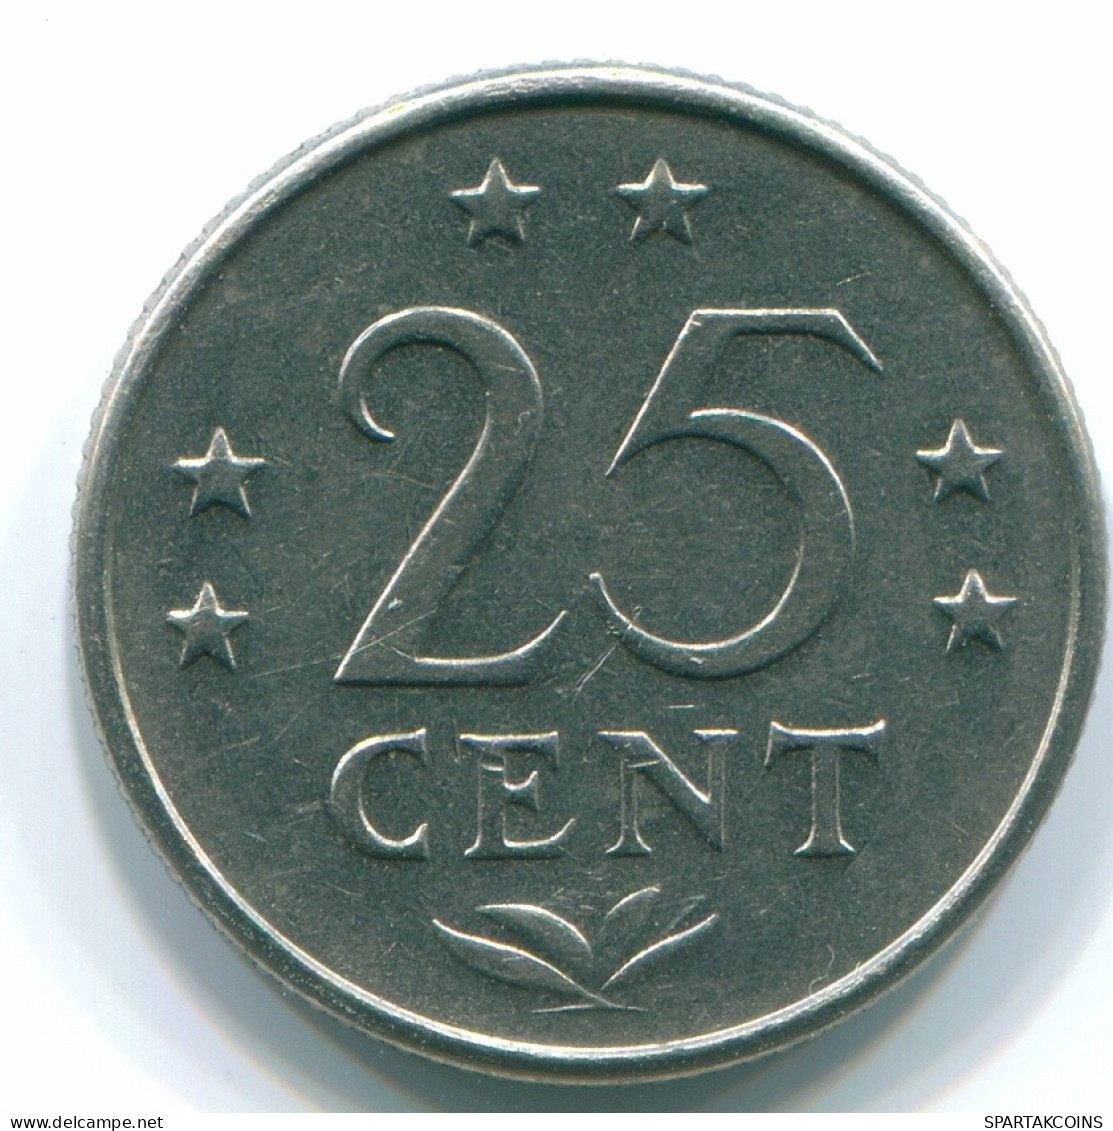 25 CENTS 1970 NETHERLANDS ANTILLES Nickel Colonial Coin #S11446.U.A - Netherlands Antilles